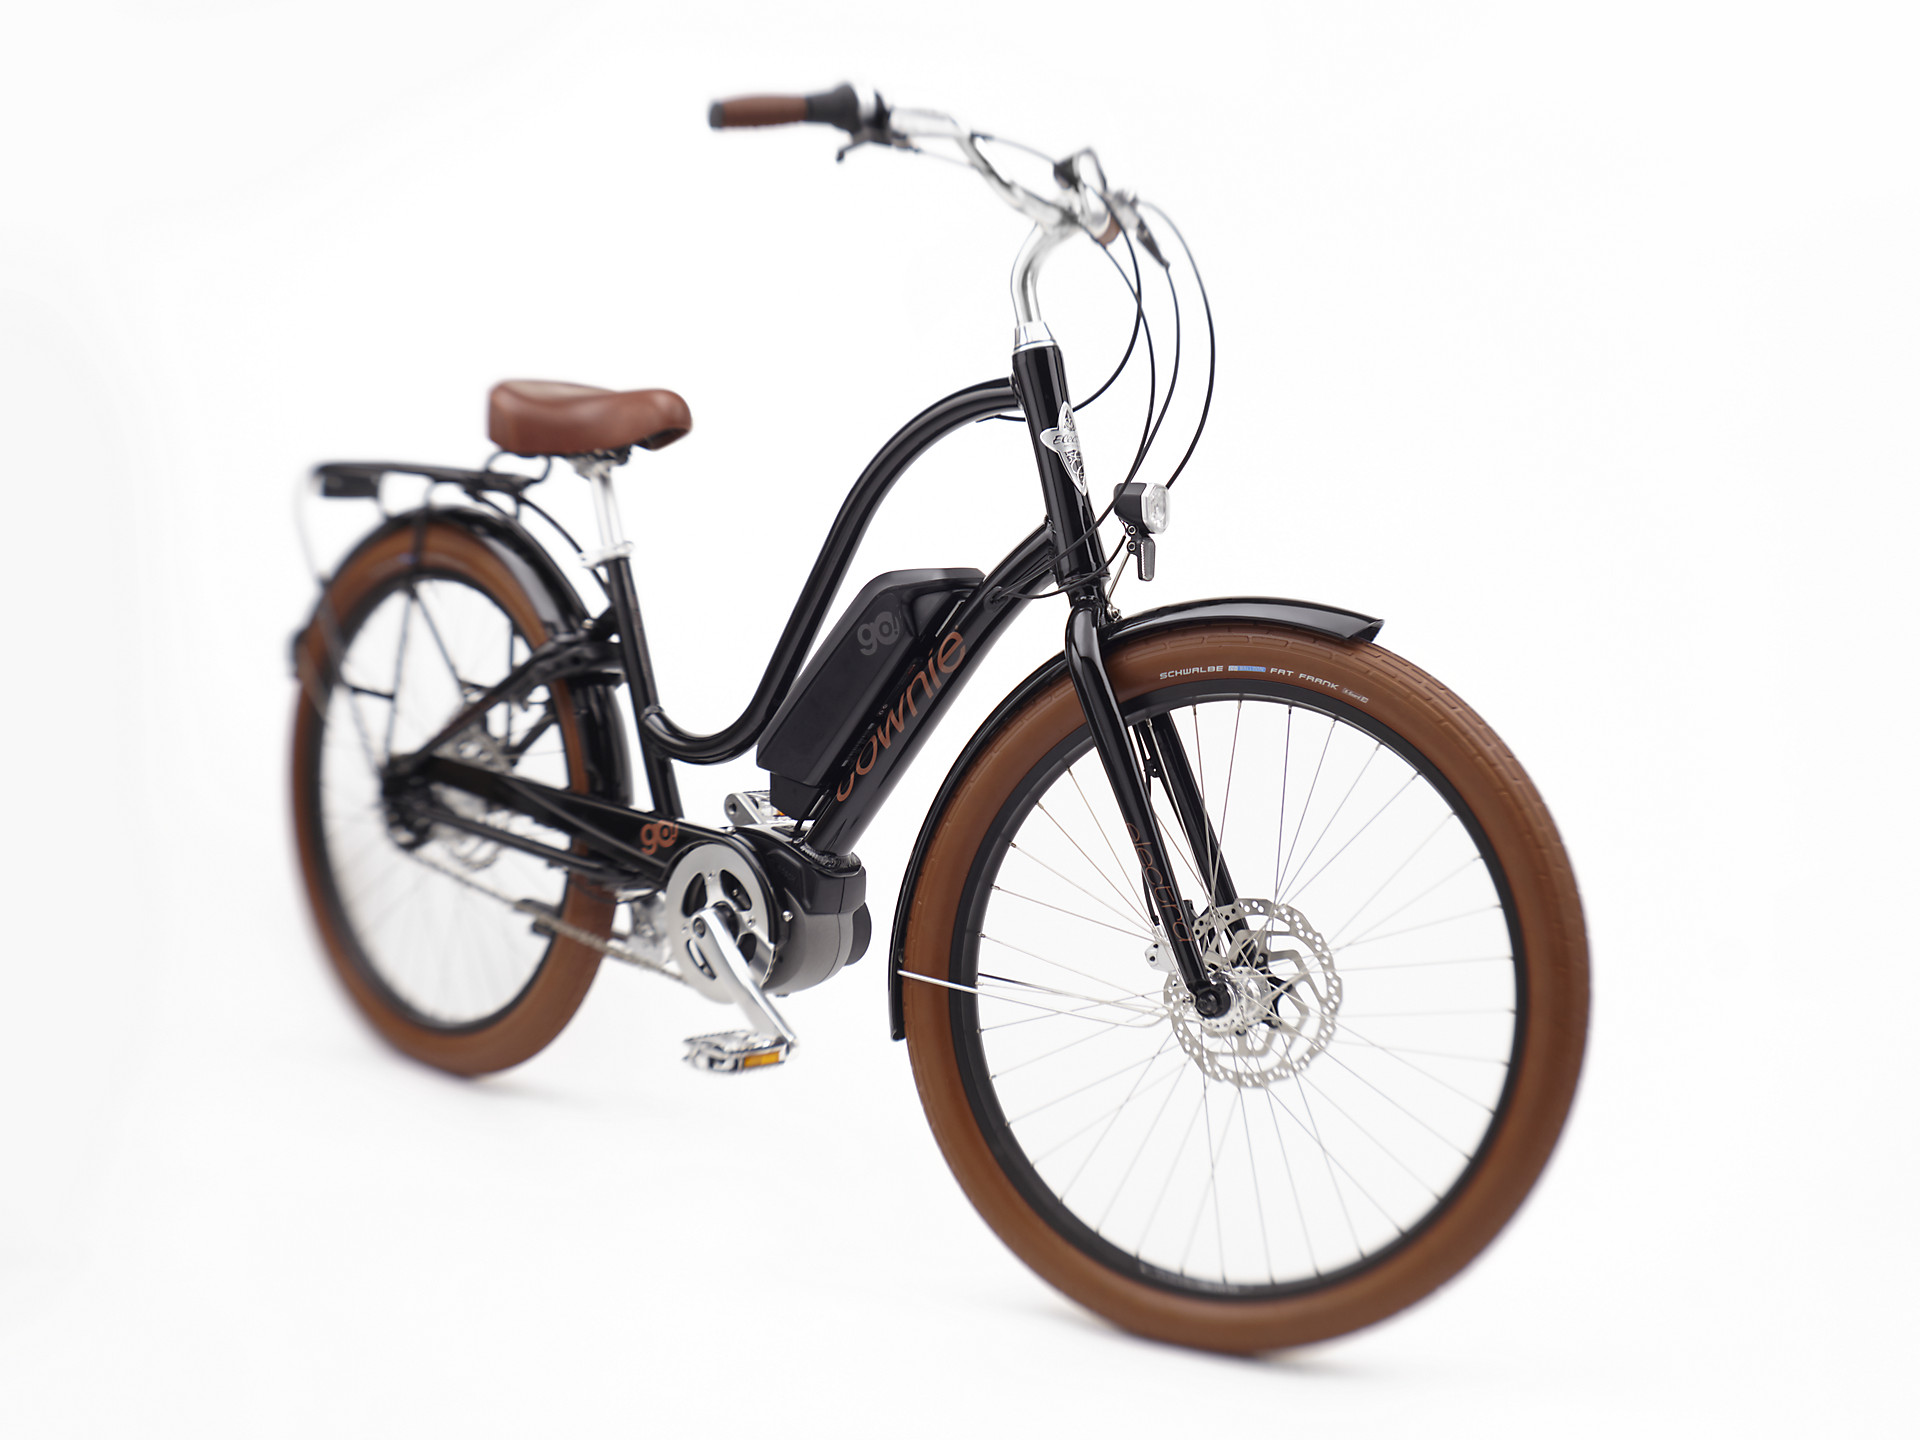 Complete your Idaho adventure with a Townie Go! Electric Bike Rental from The Cycle Haus!